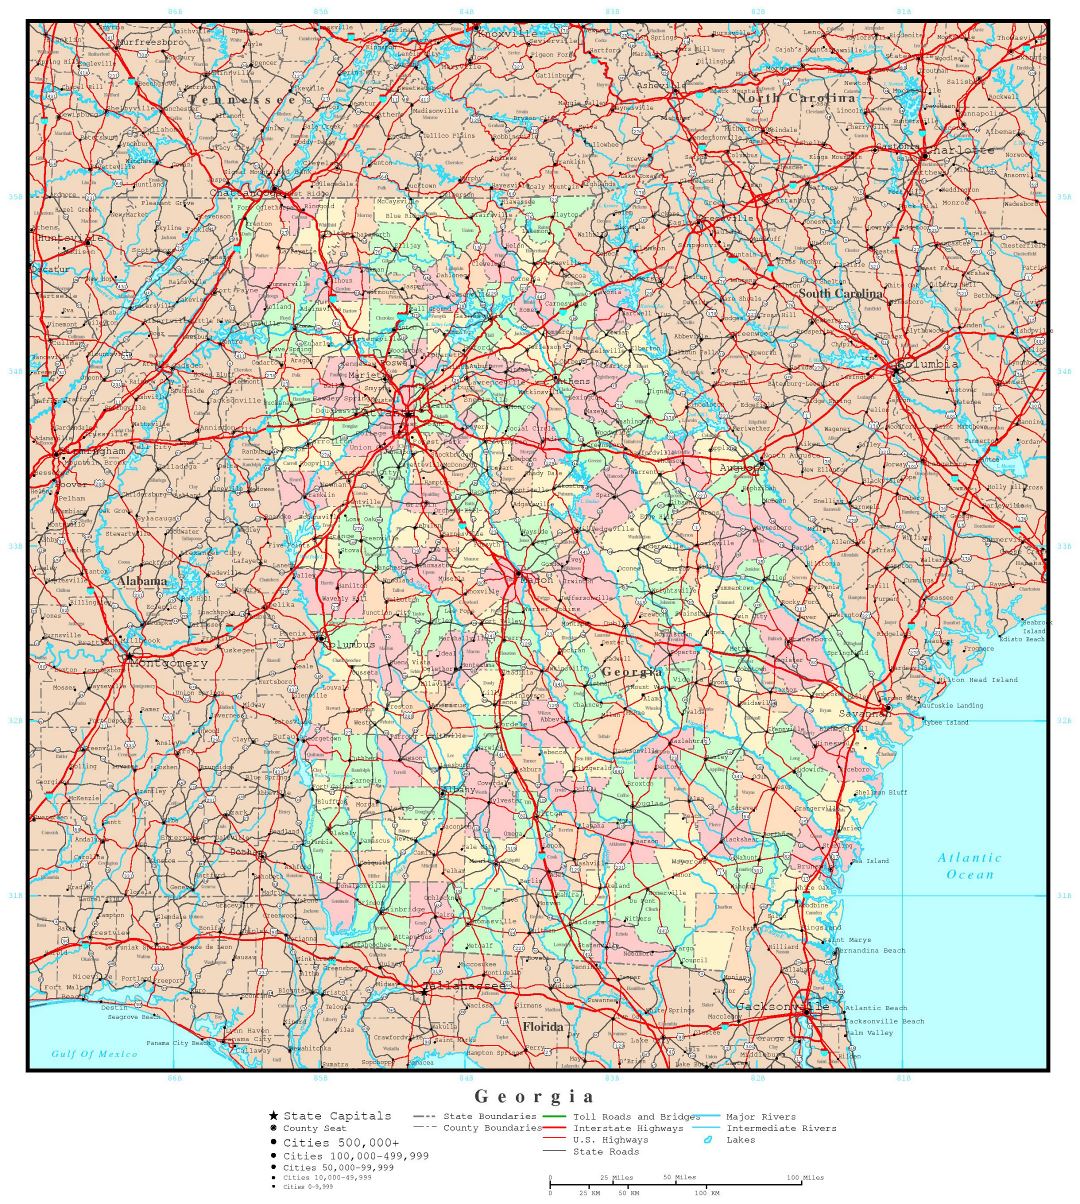 Large administrative map of Georgia state with roads, highways and major cities